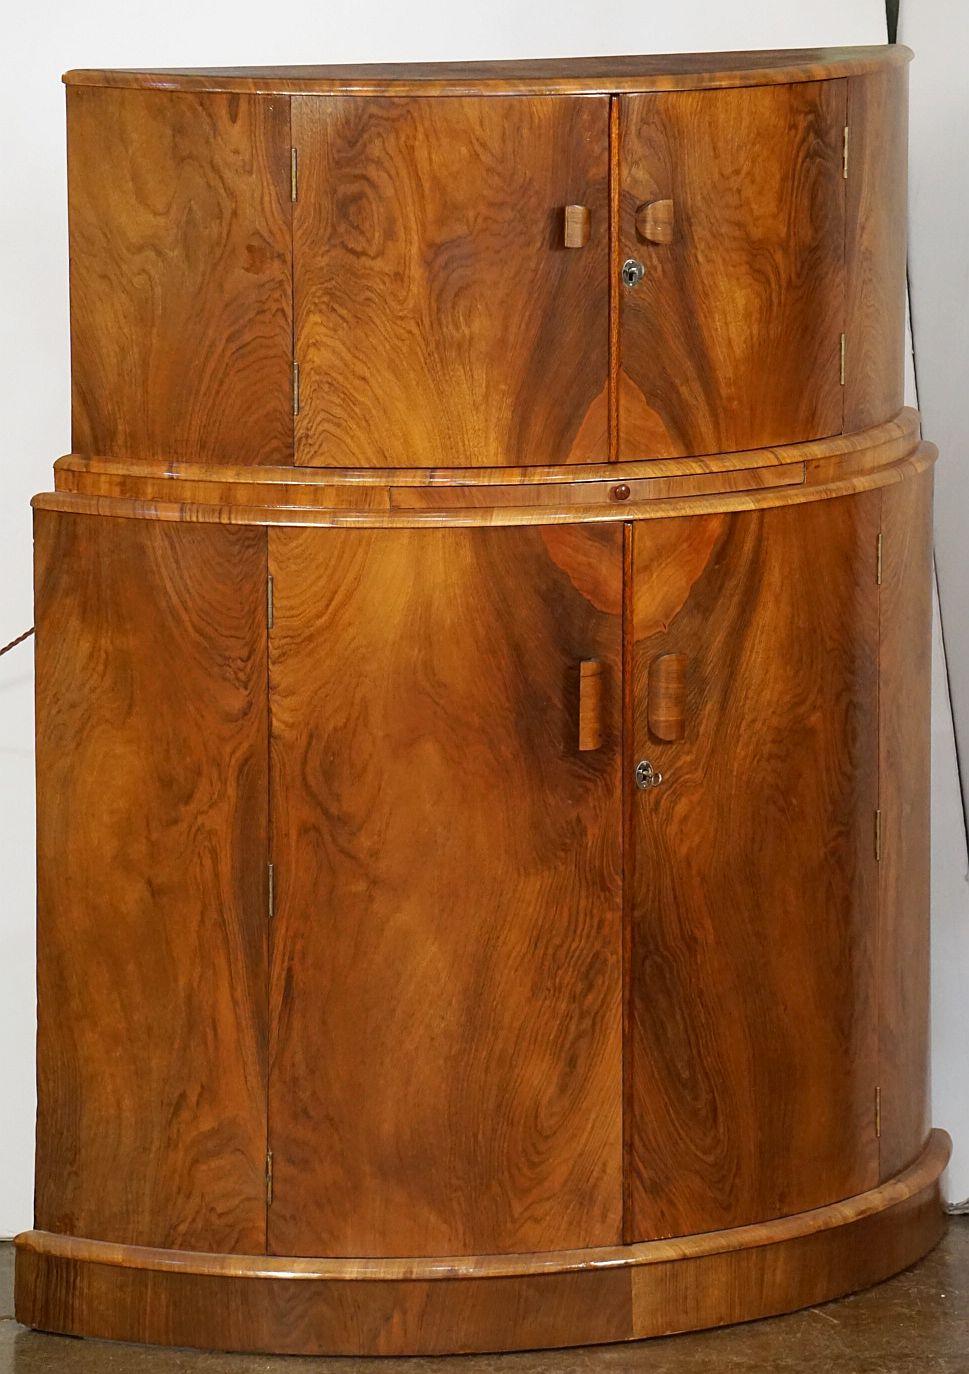 20th Century French Art Deco Demilune Bar or Cocktail Cabinet of Walnut